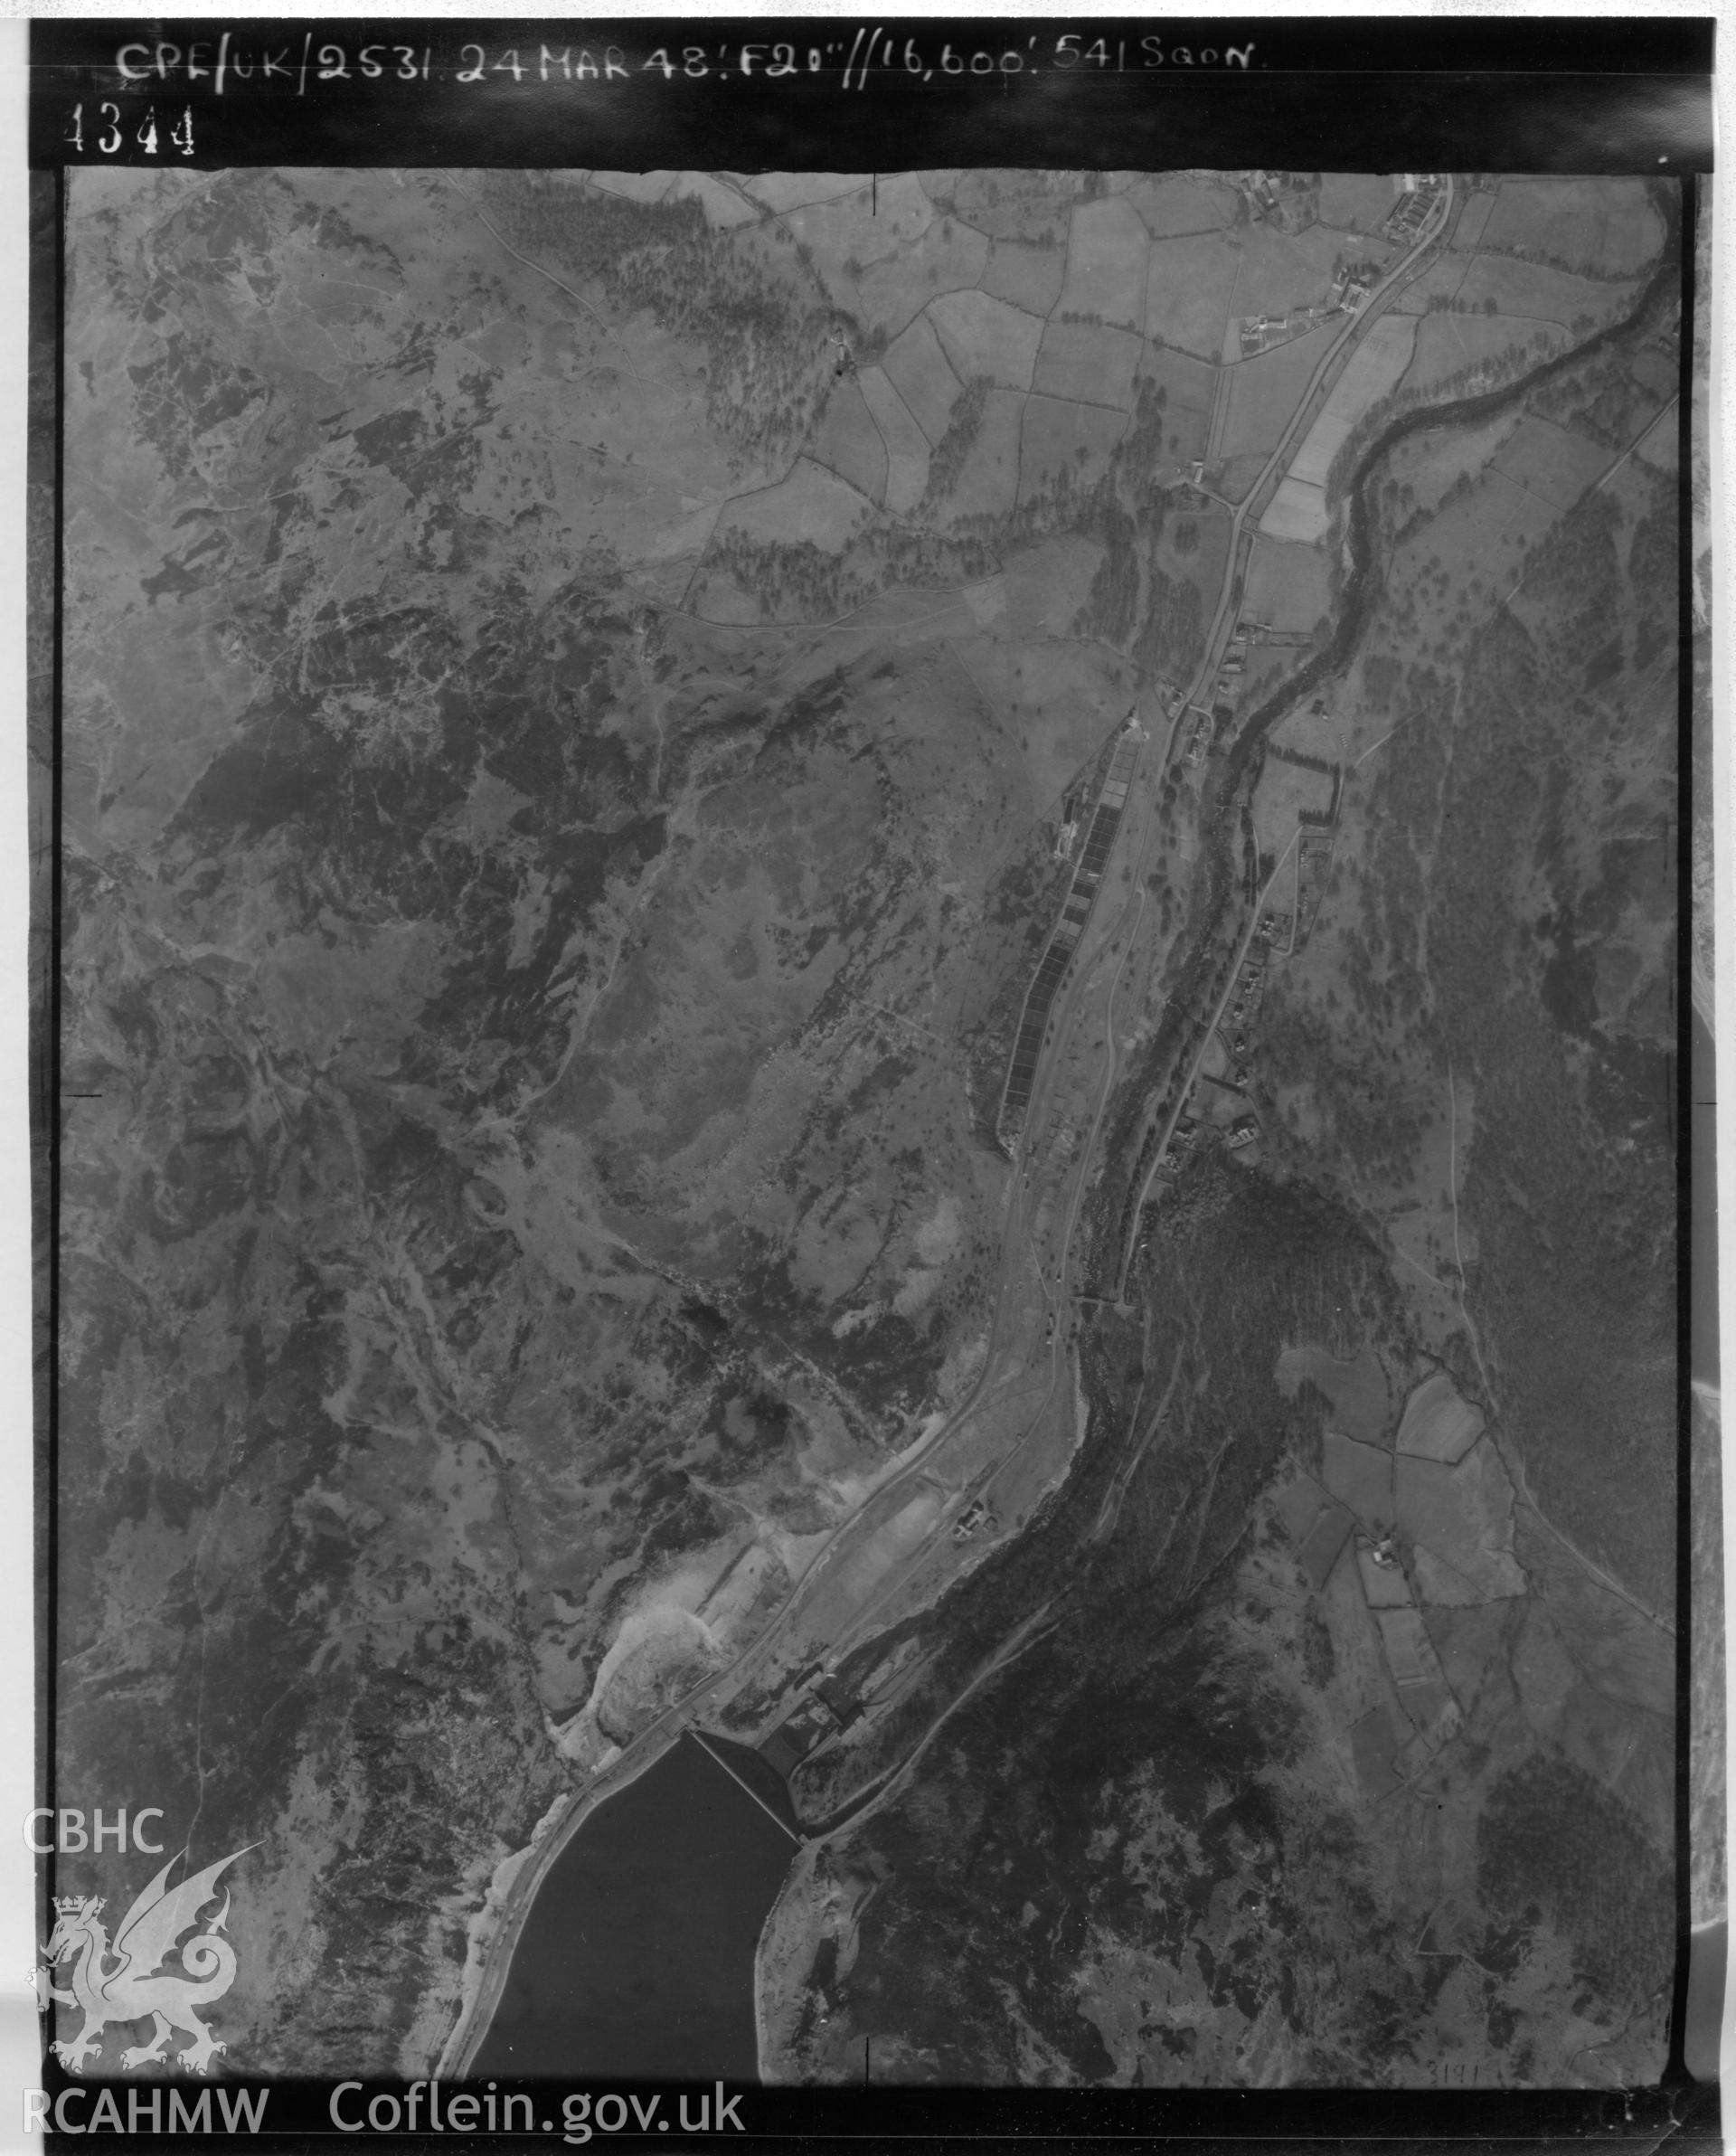 Aerial photograph of the Elan Valley, dated 1948. Included in material relating to Archaeological Desk Based Assessment of Afon Claerwen, Elan Valley, Rhayader, Powys. Assessment conducted by Archaeology Wales in 2018. Report no. 1681. Project no. 2573.